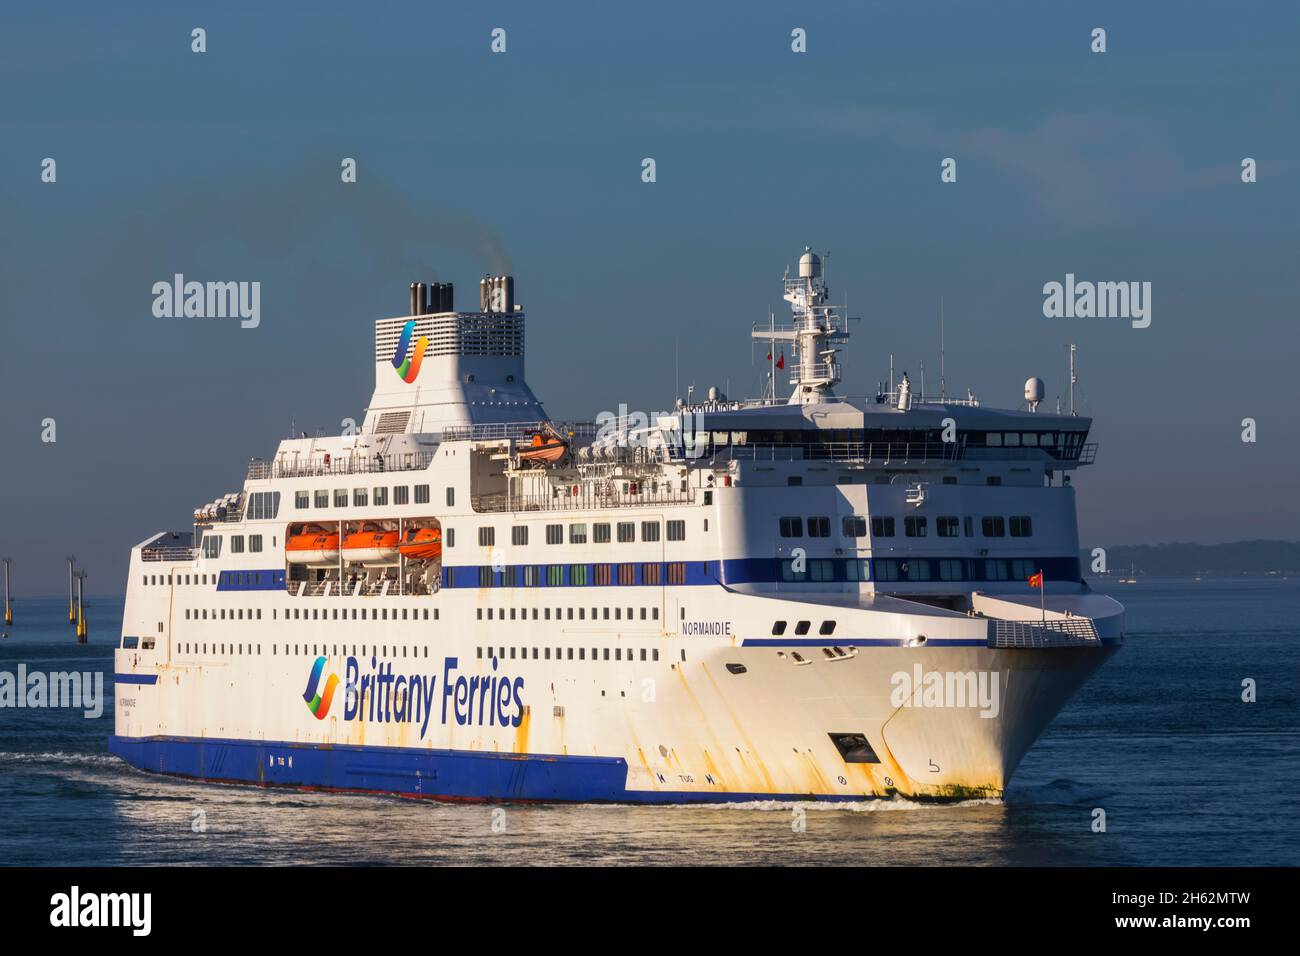 angleterre,hampshire,portsmouth,bretagne ferries navire normandie Banque D'Images